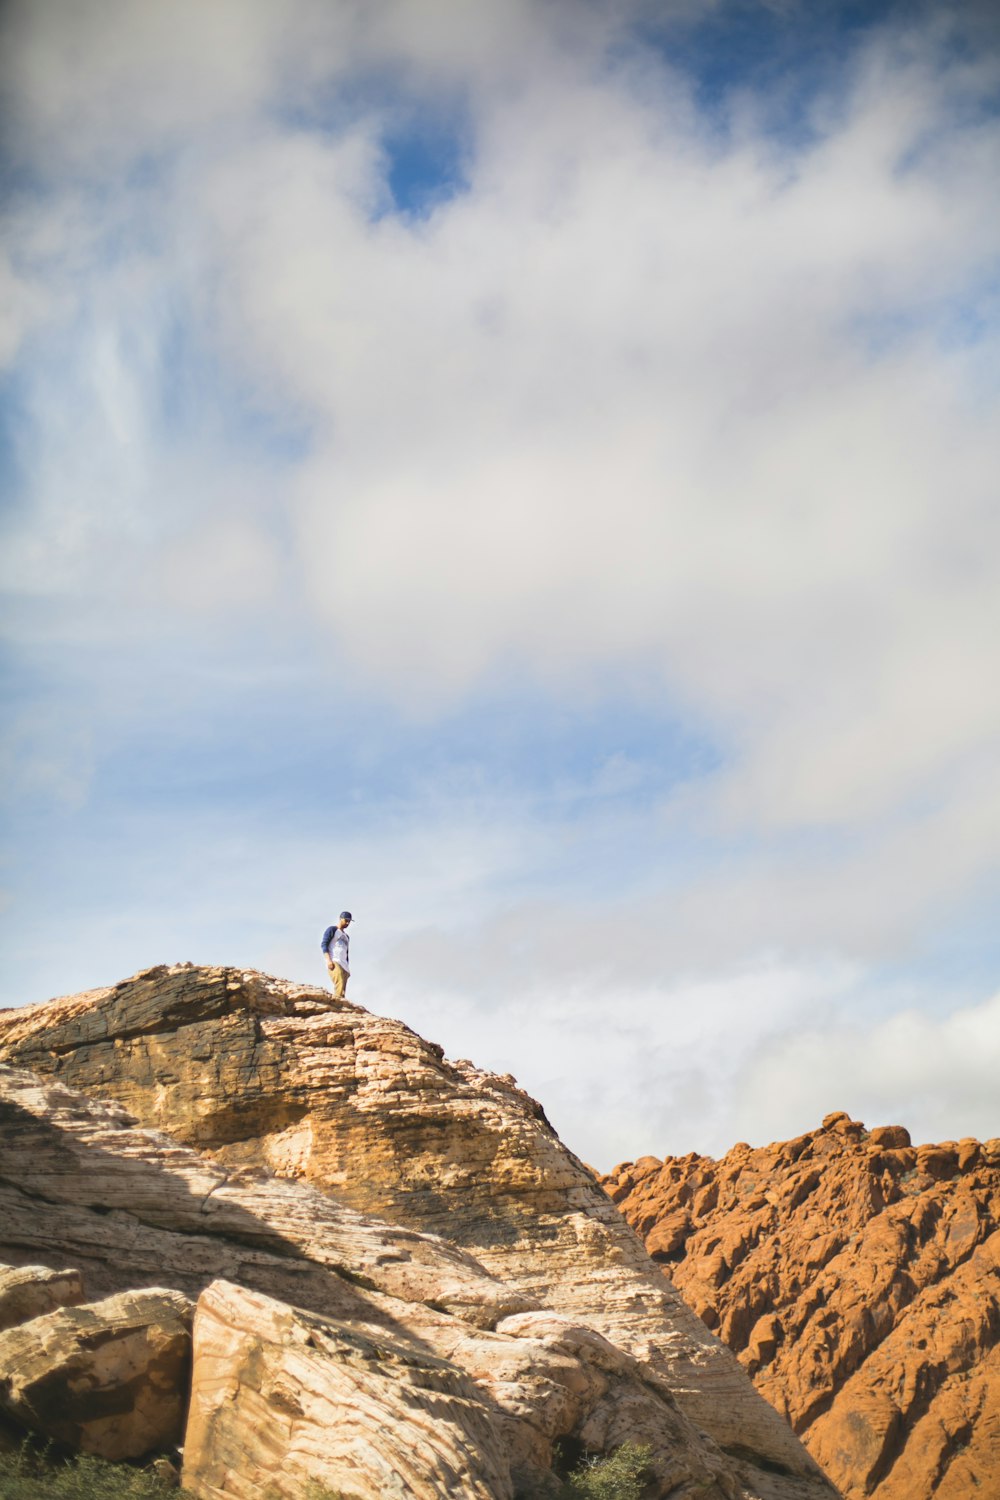 person standing on brown rock formation under white clouds and blue sky during daytime